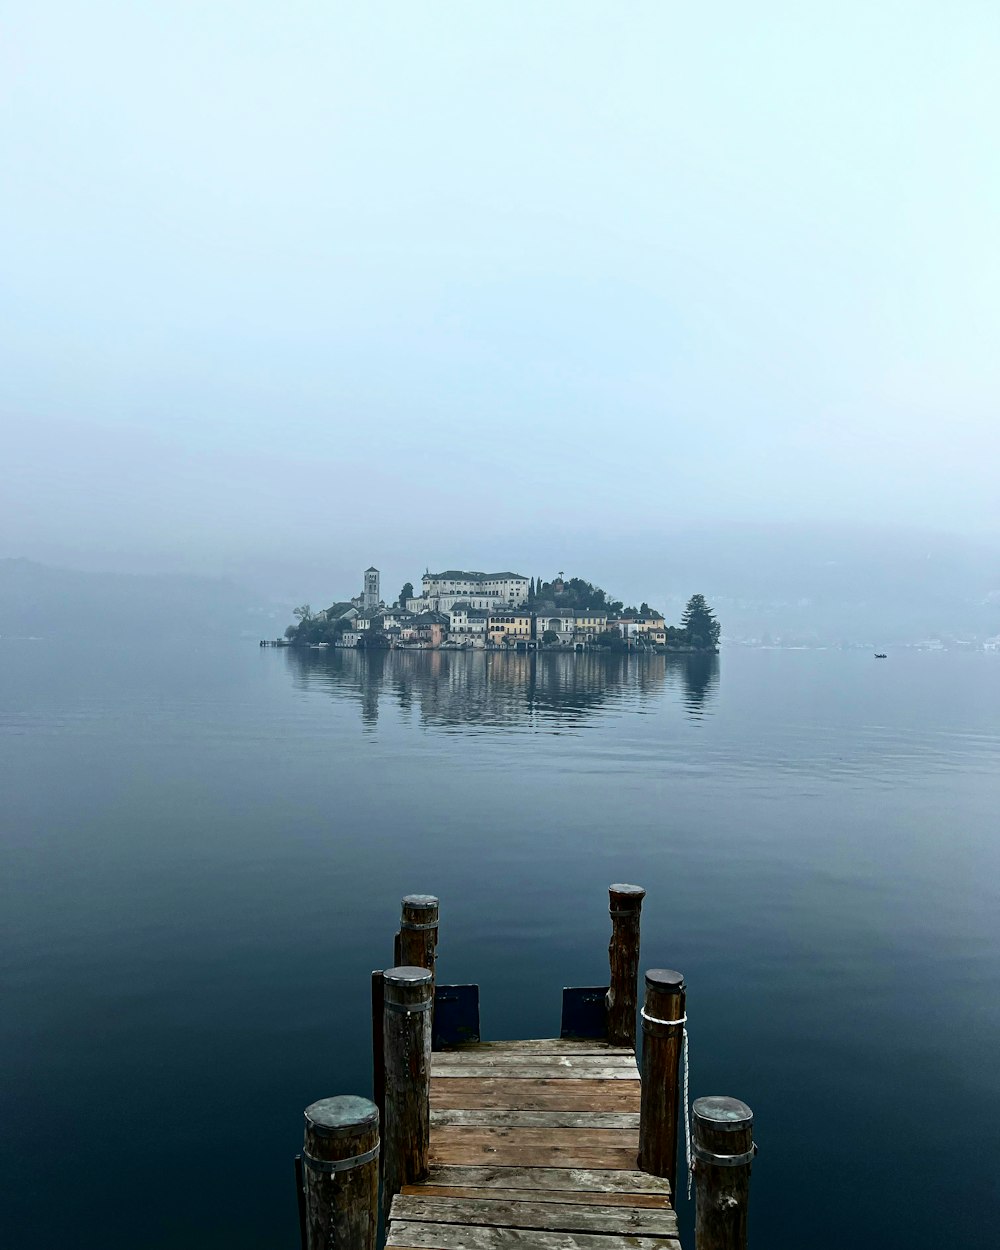 a dock on a body of water with a small island in the background